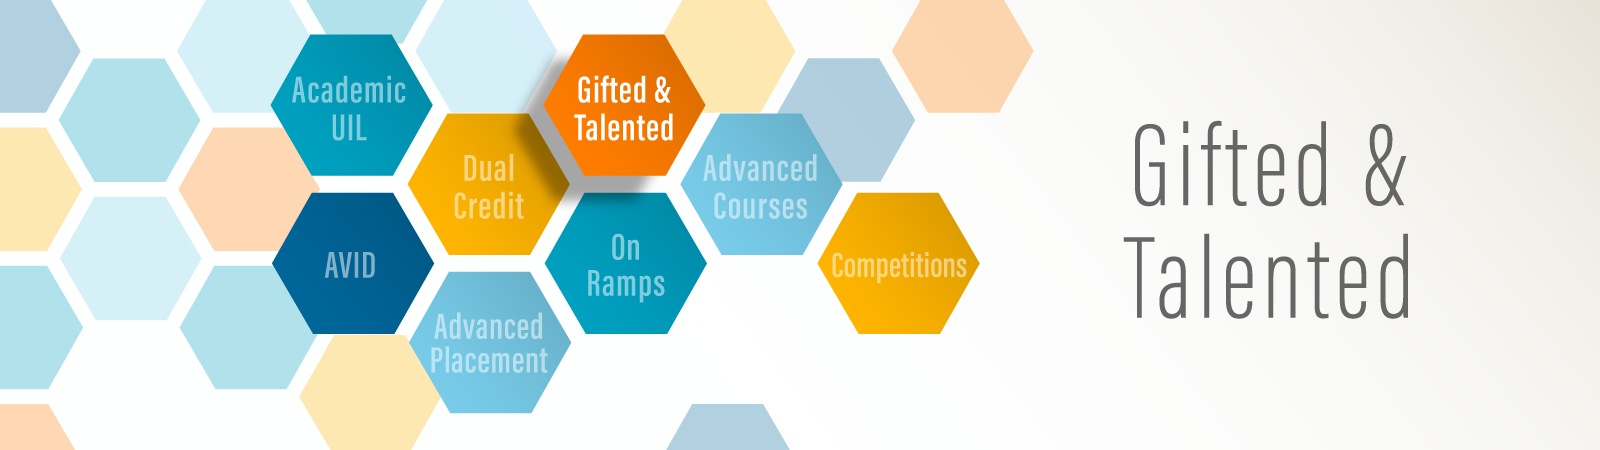 Gifted and talented banner 